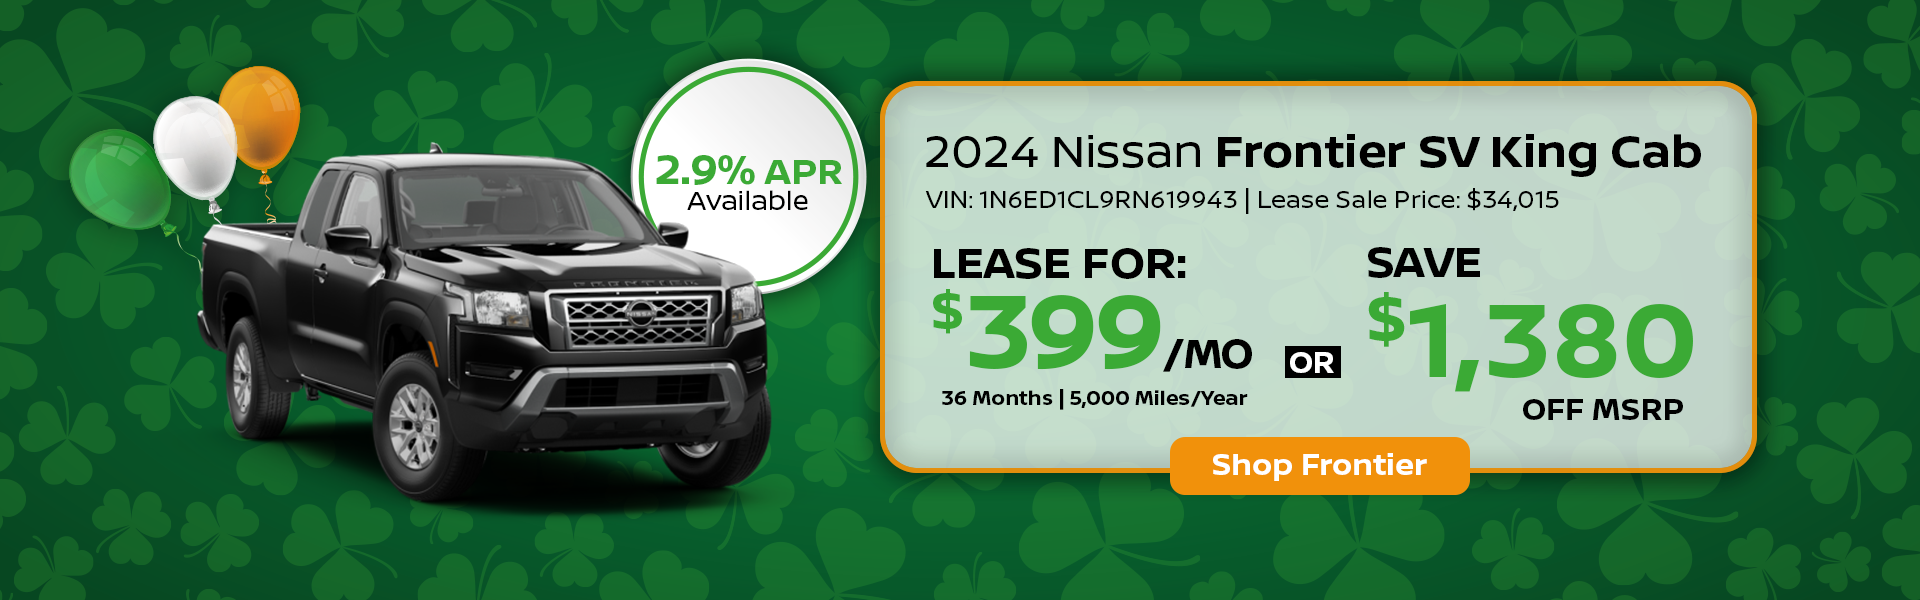 Nissan Frontier Special Offer Norwell, MA